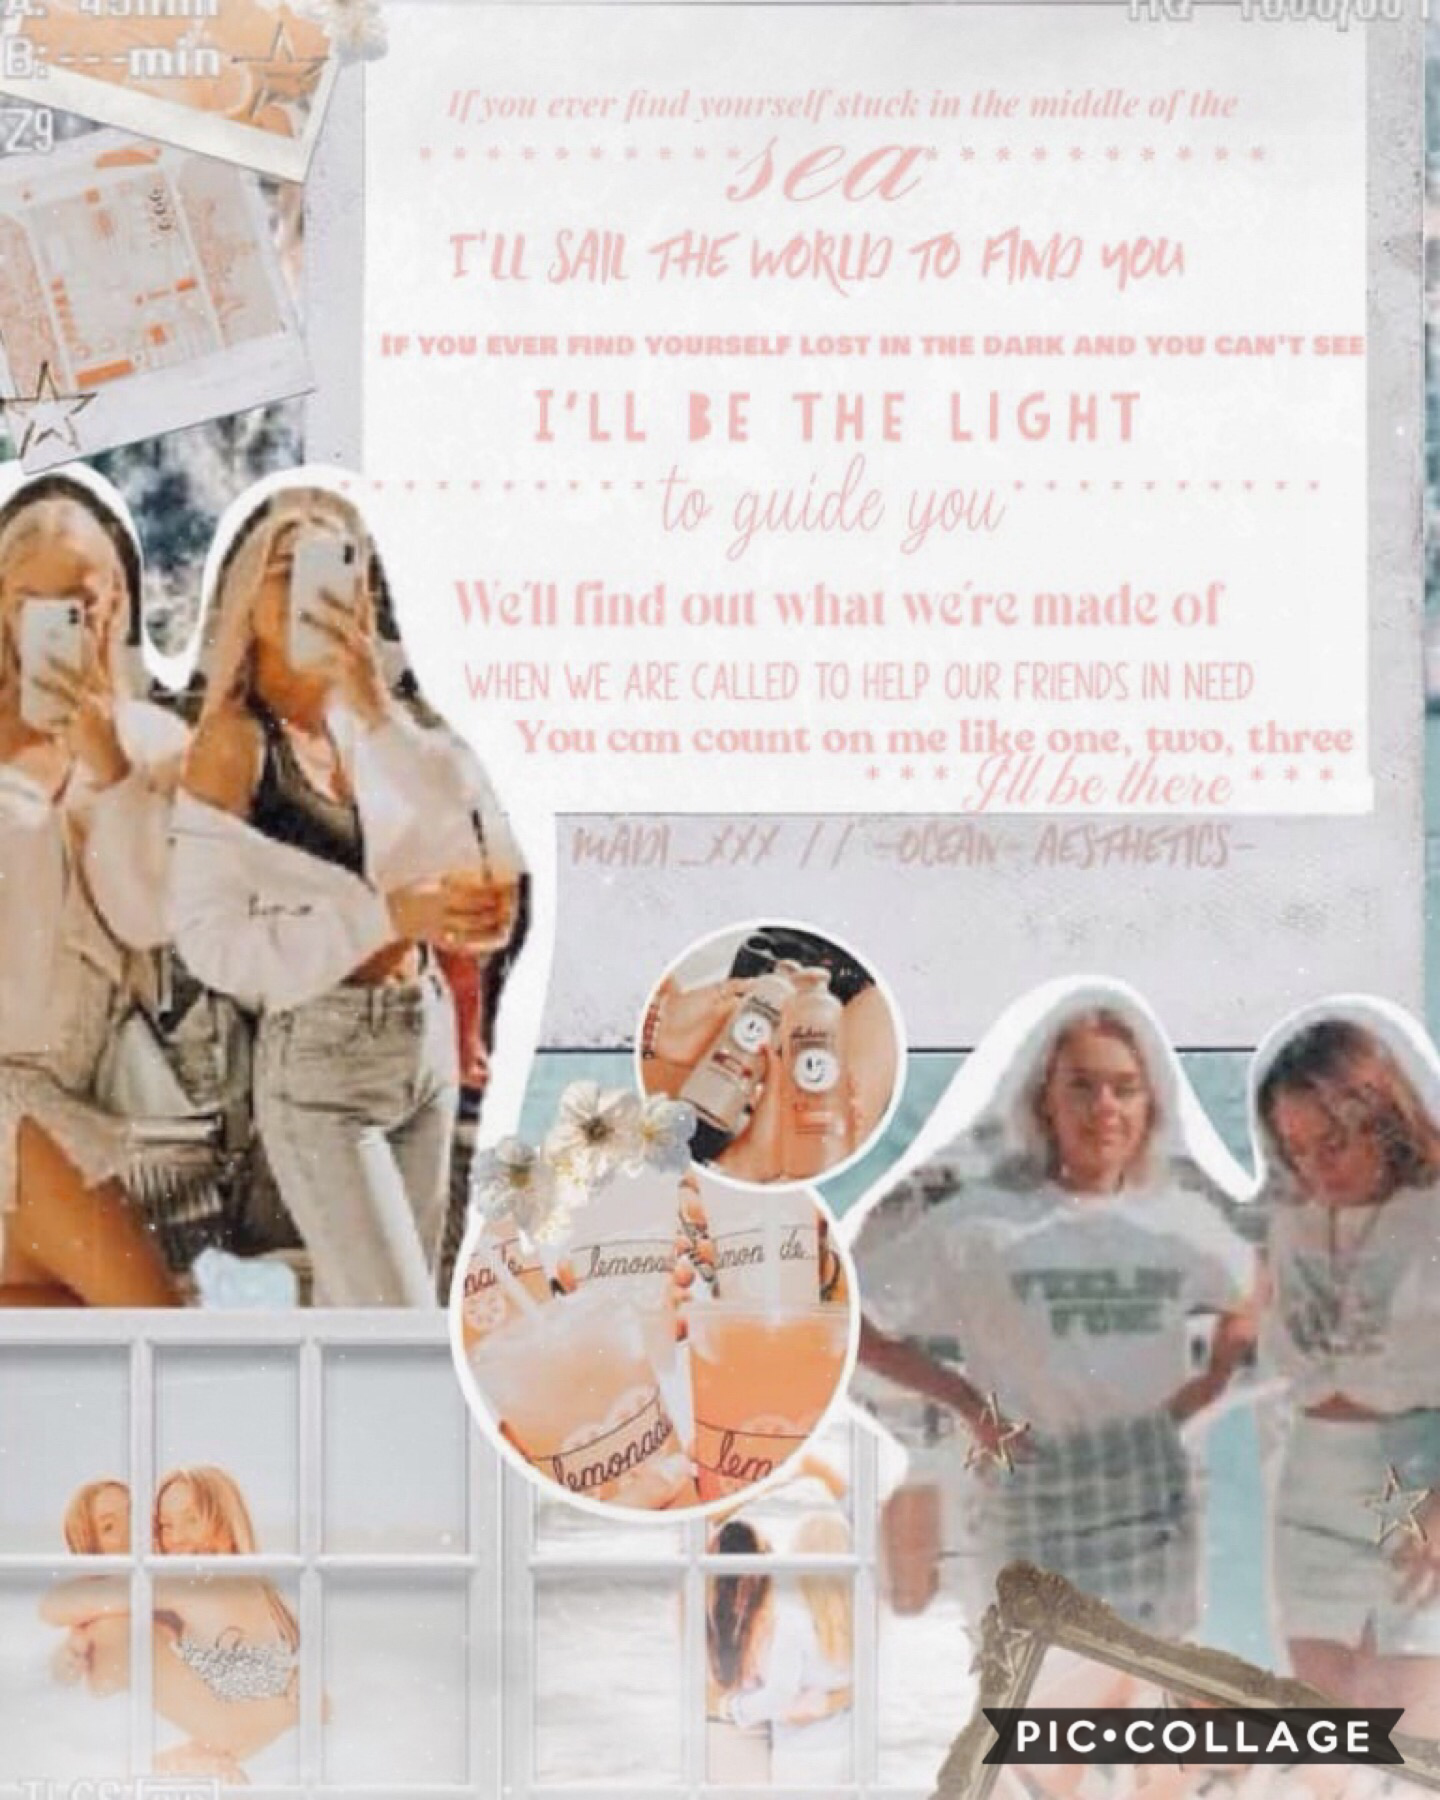 🍑-3/1/2021-🍑
Collab with my bestie @madi_xxx!!! She’s so amazing and sweet!! She did the beautiful text and I did the bg! Hope you like it! Qotd: favourite song? Aotd: atm anything from evermore😂